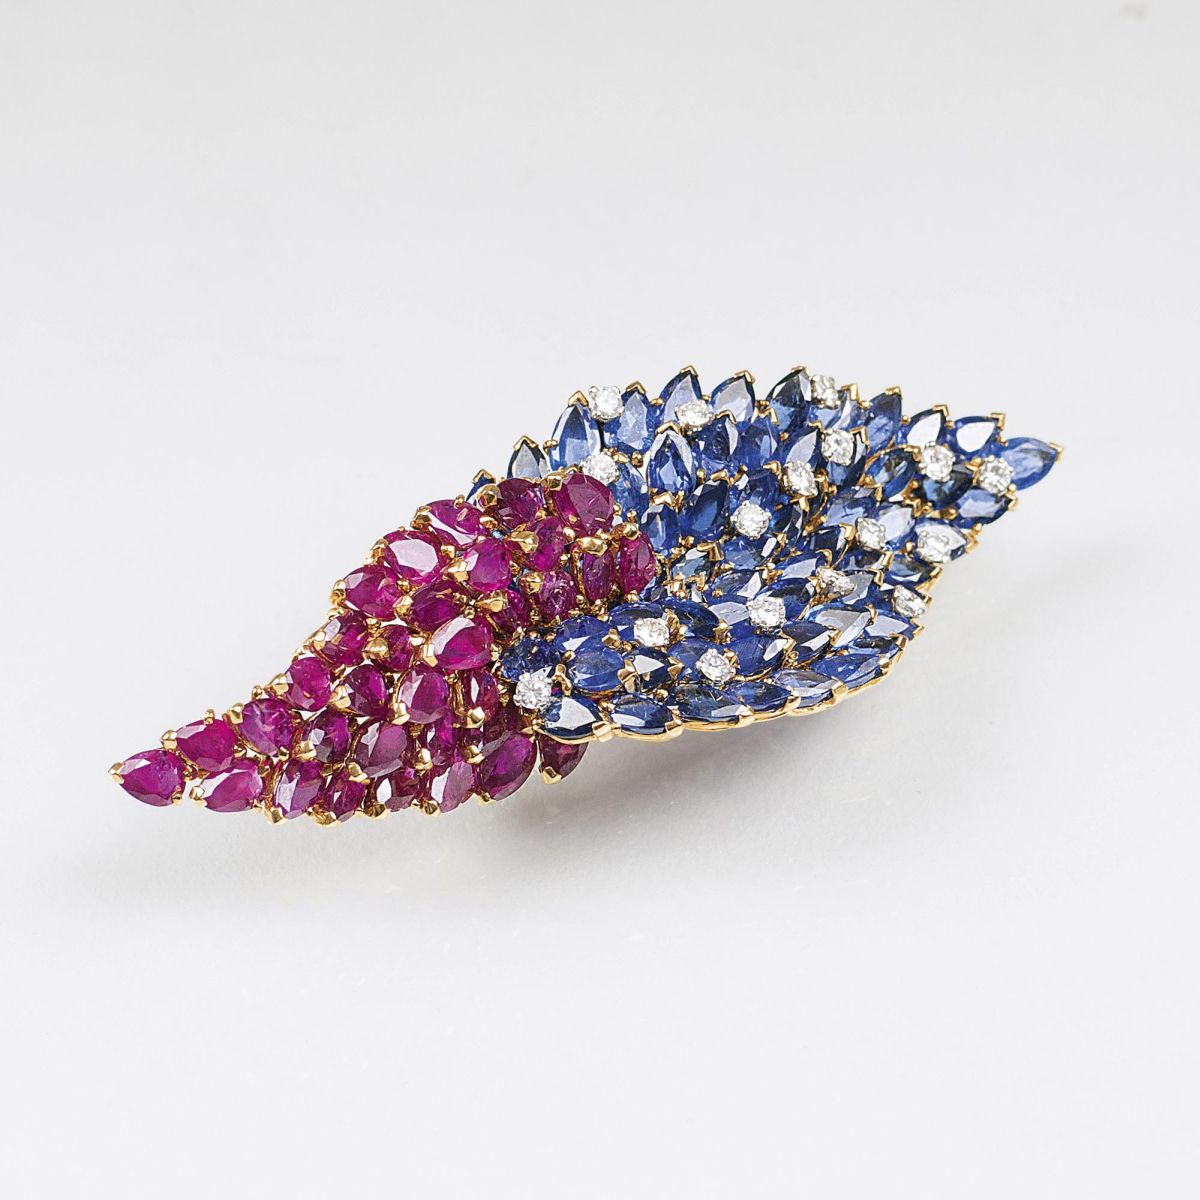 An extraordinary French Vintage Brooch with Rubies, Diamonds and Natural Sapphires